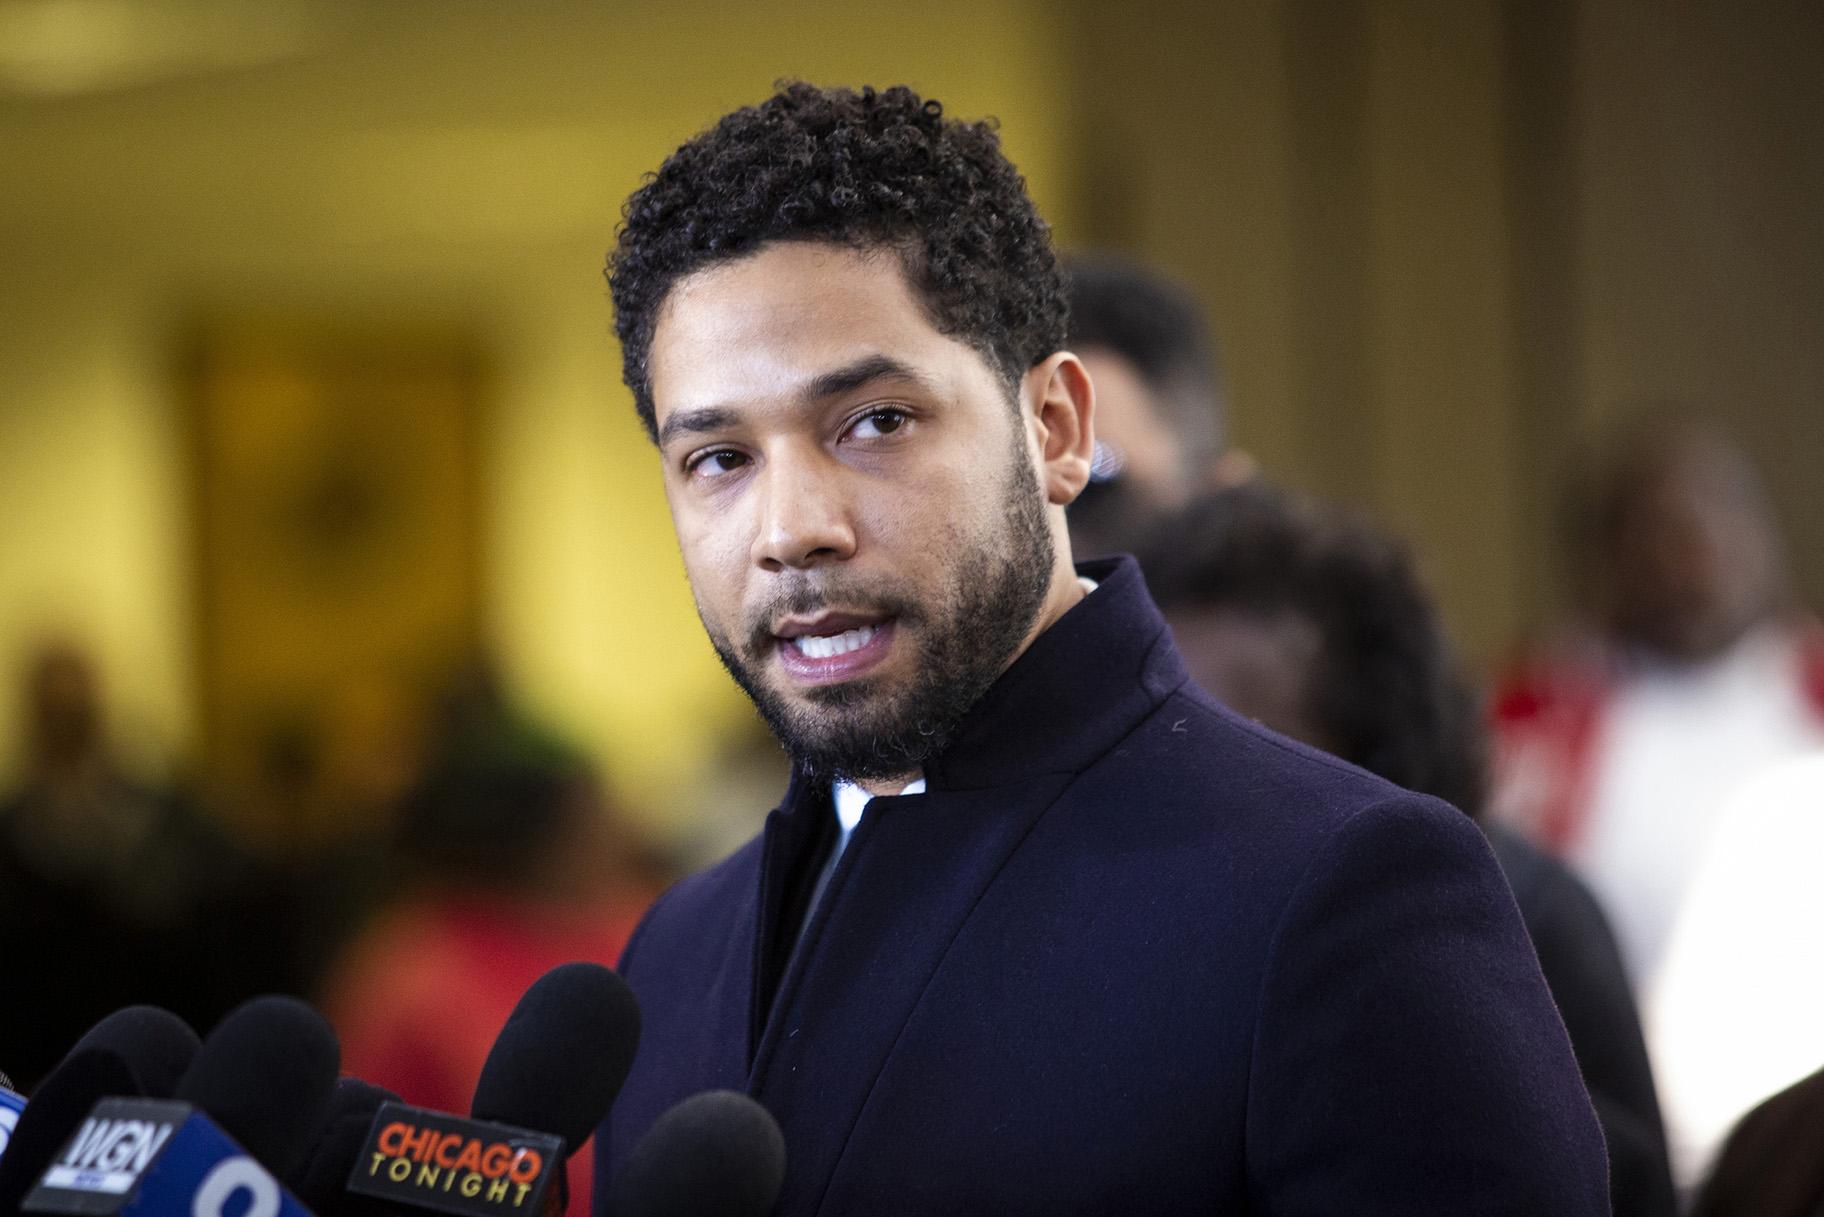 Actor Jussie Smollett leaves the Leighton Criminal Courthouse in Chicago on Tuesday March 26, 2019, after prosecutors dropped all charges against him. (Ashlee Rezin / Chicago Sun-Times via AP)